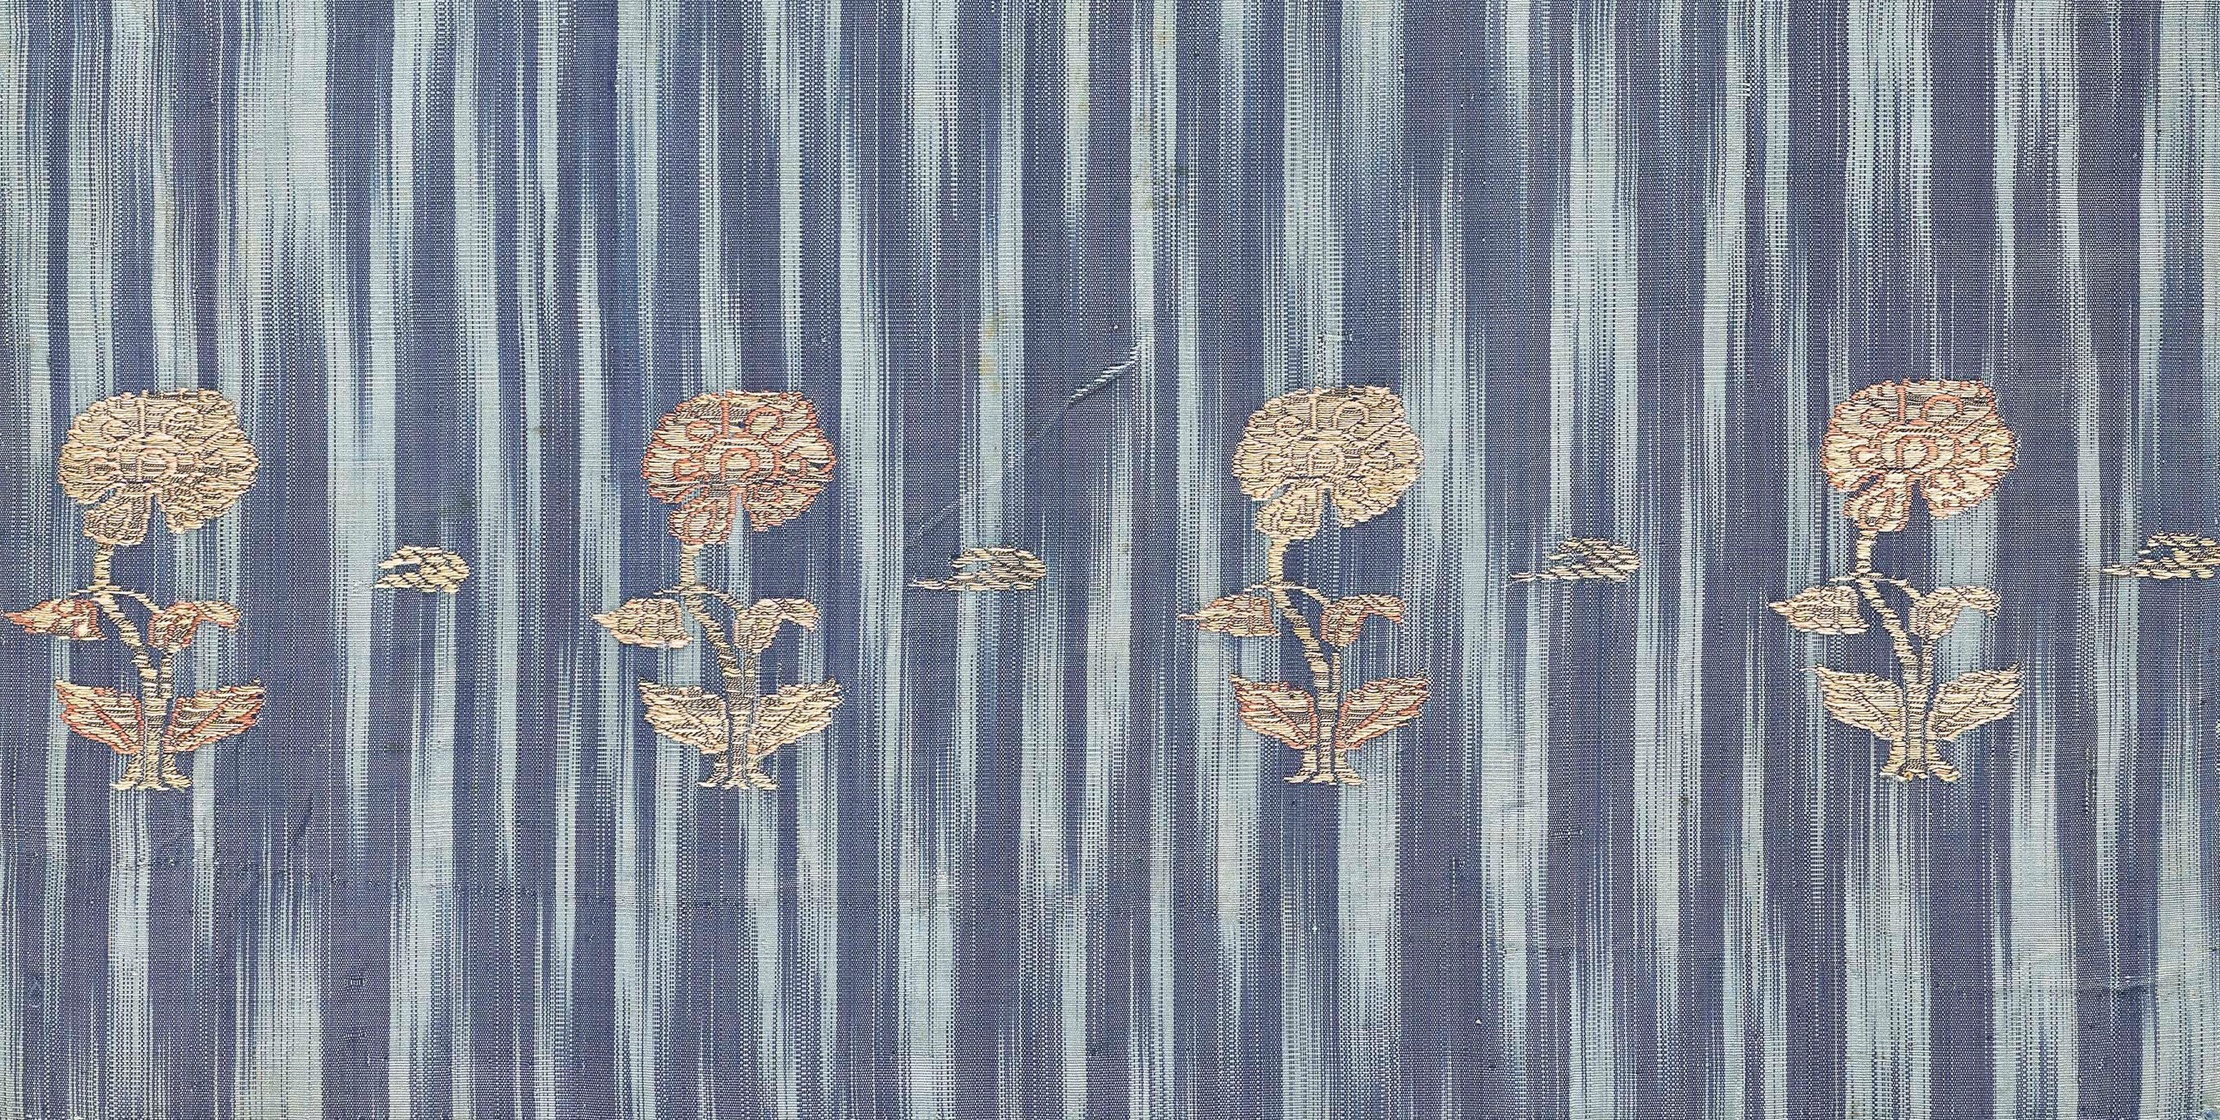 A detail of a textile with a blue crisscross pattern on a lighter blue ground. There are eight embroidered flowers in two rows.